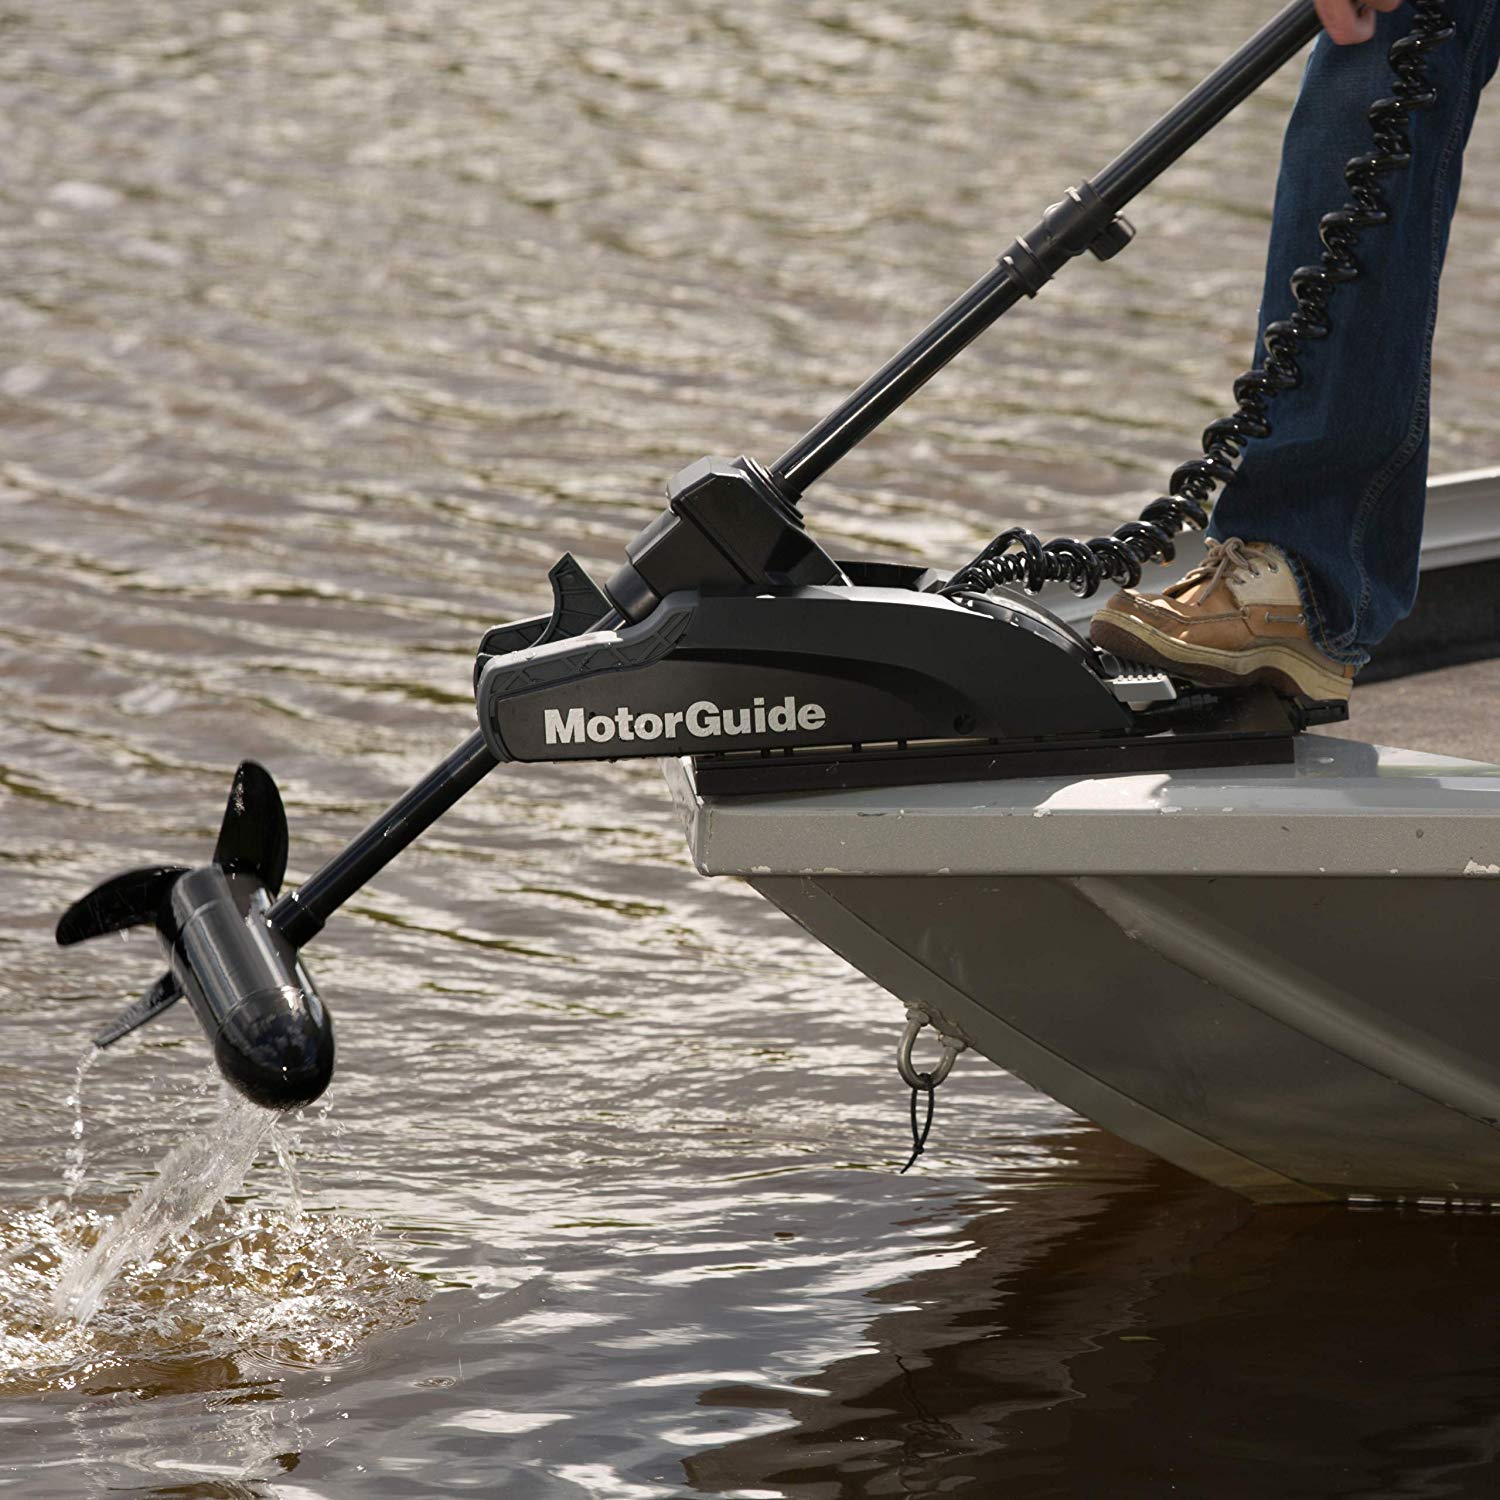 Millimeter Verzakking atmosfeer 3 Reasons to Own a GPS Enabled Trolling Motor | Outdoor Life